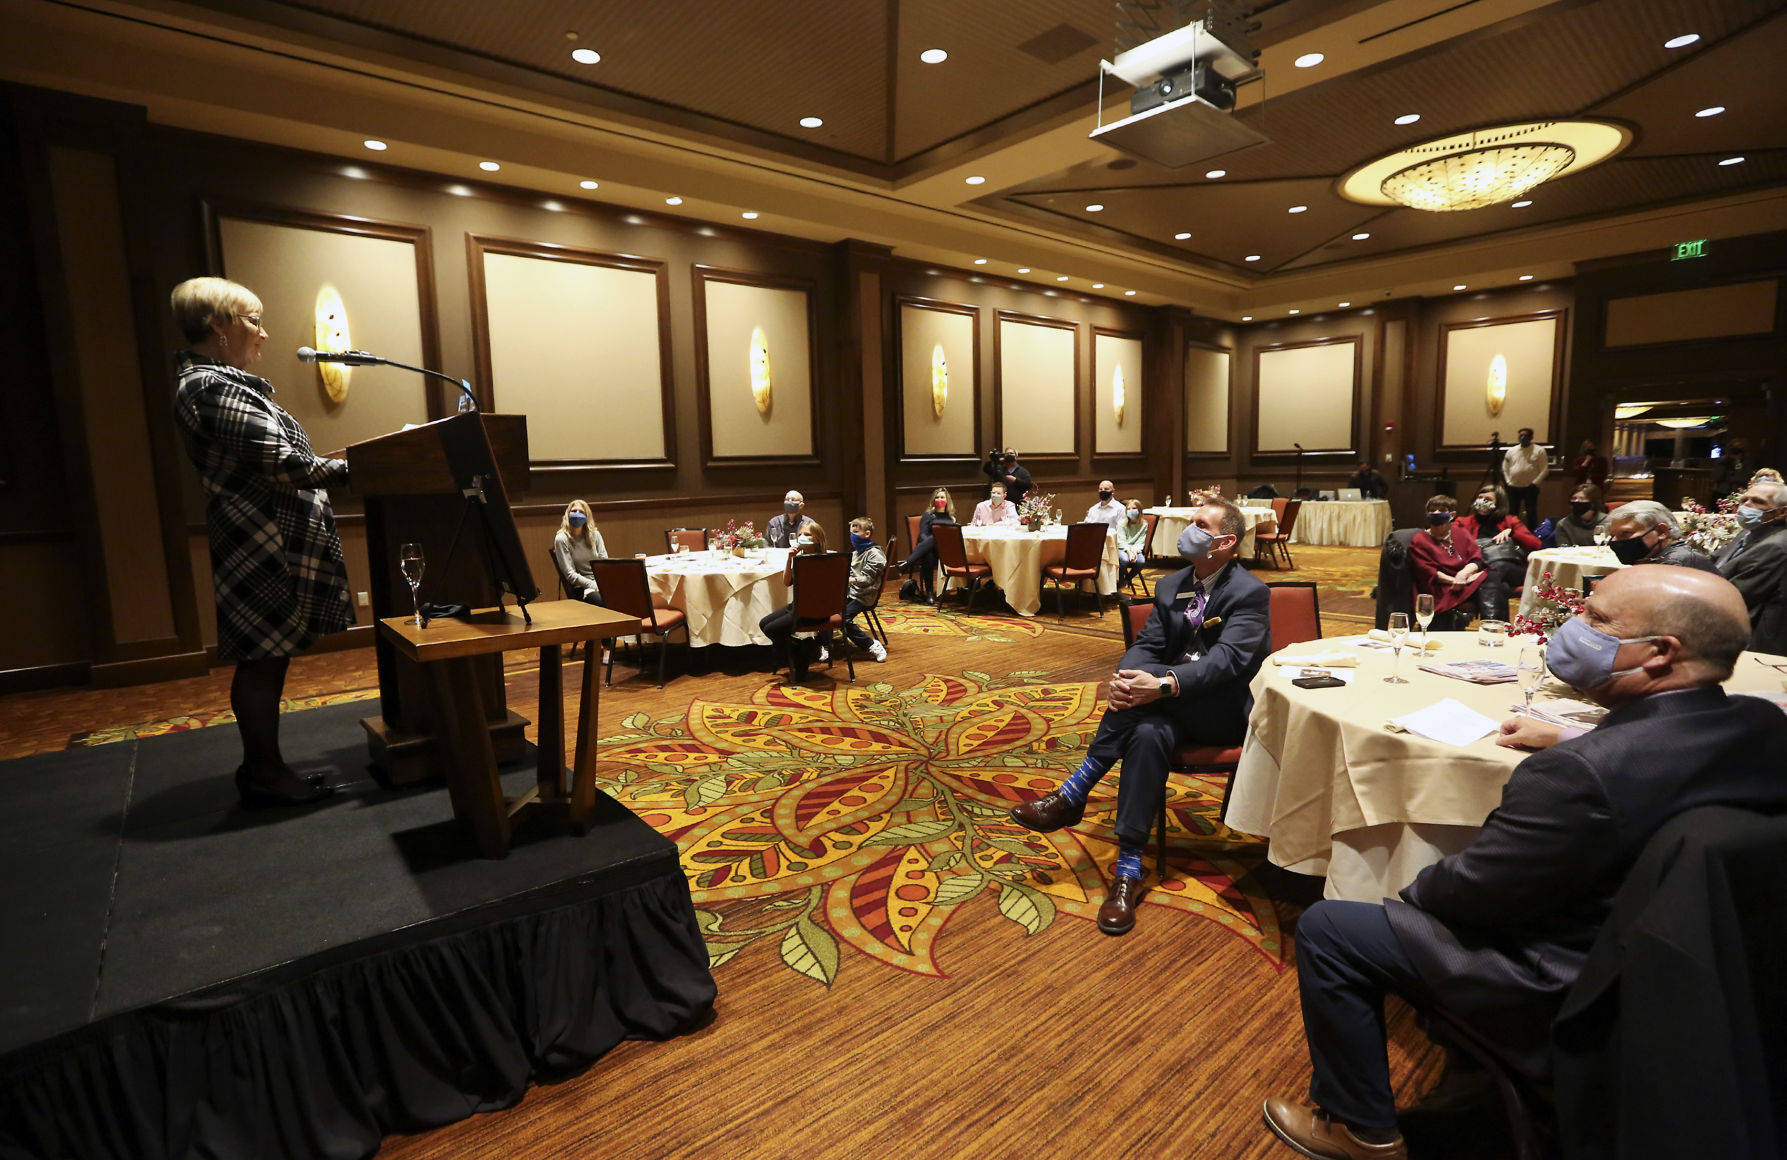 Judy Wolf, recipient of the 2020 Telegraph Herald First Citizen Award, speaks during a reception at Diamond Jo Casino in Dubuque on Thursday, Jan. 28, 2021.    PHOTO CREDIT: NICKI KOHL